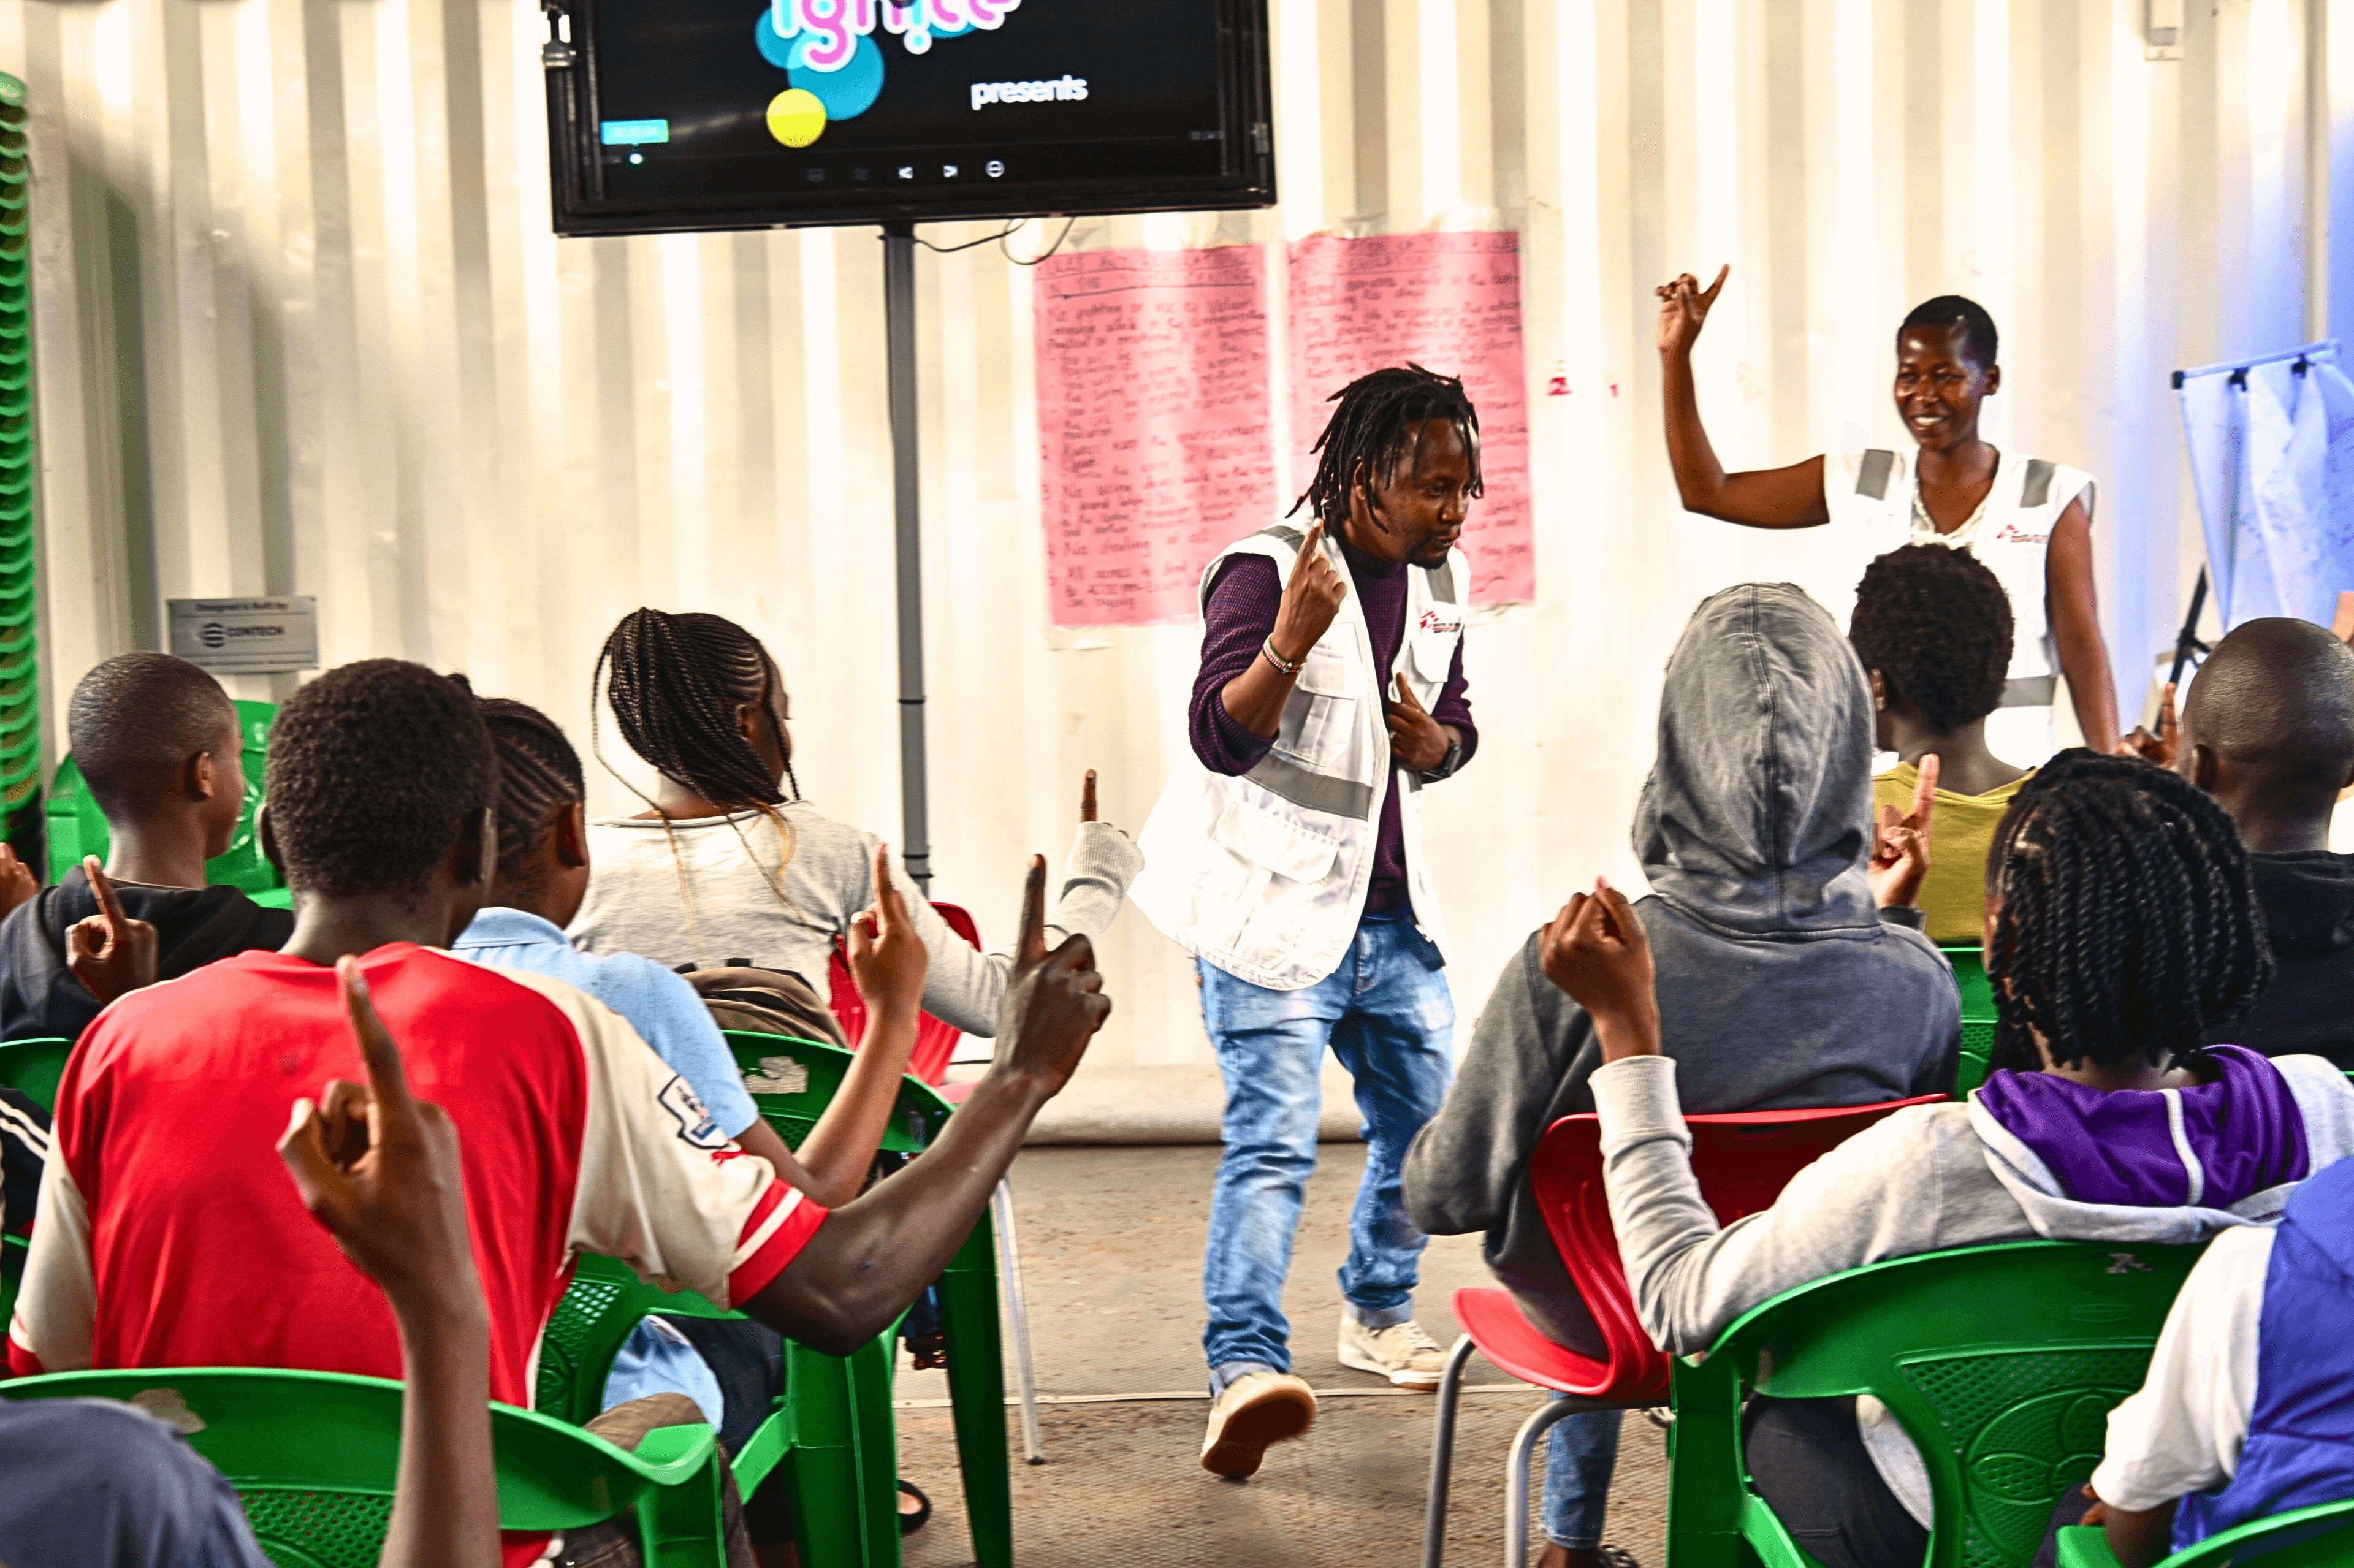 Beyond medical care: Dandora Youth Friendly Center, a safe space for young people from Nairobi's disadvantaged neighborhood